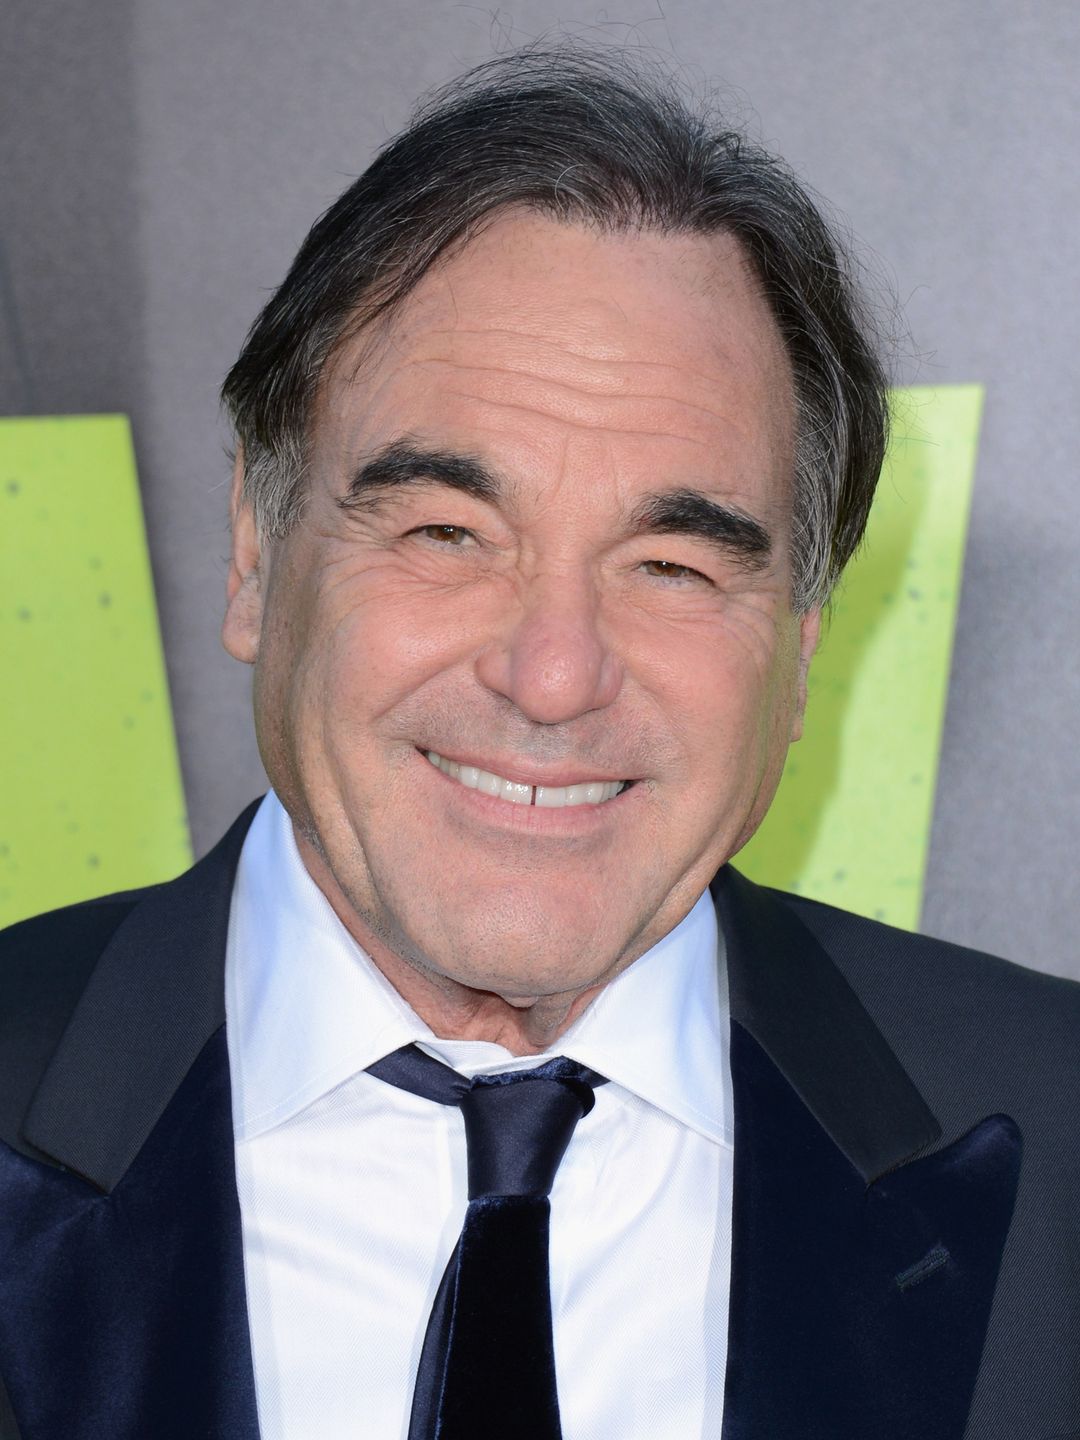 Oliver Stone who is his mother